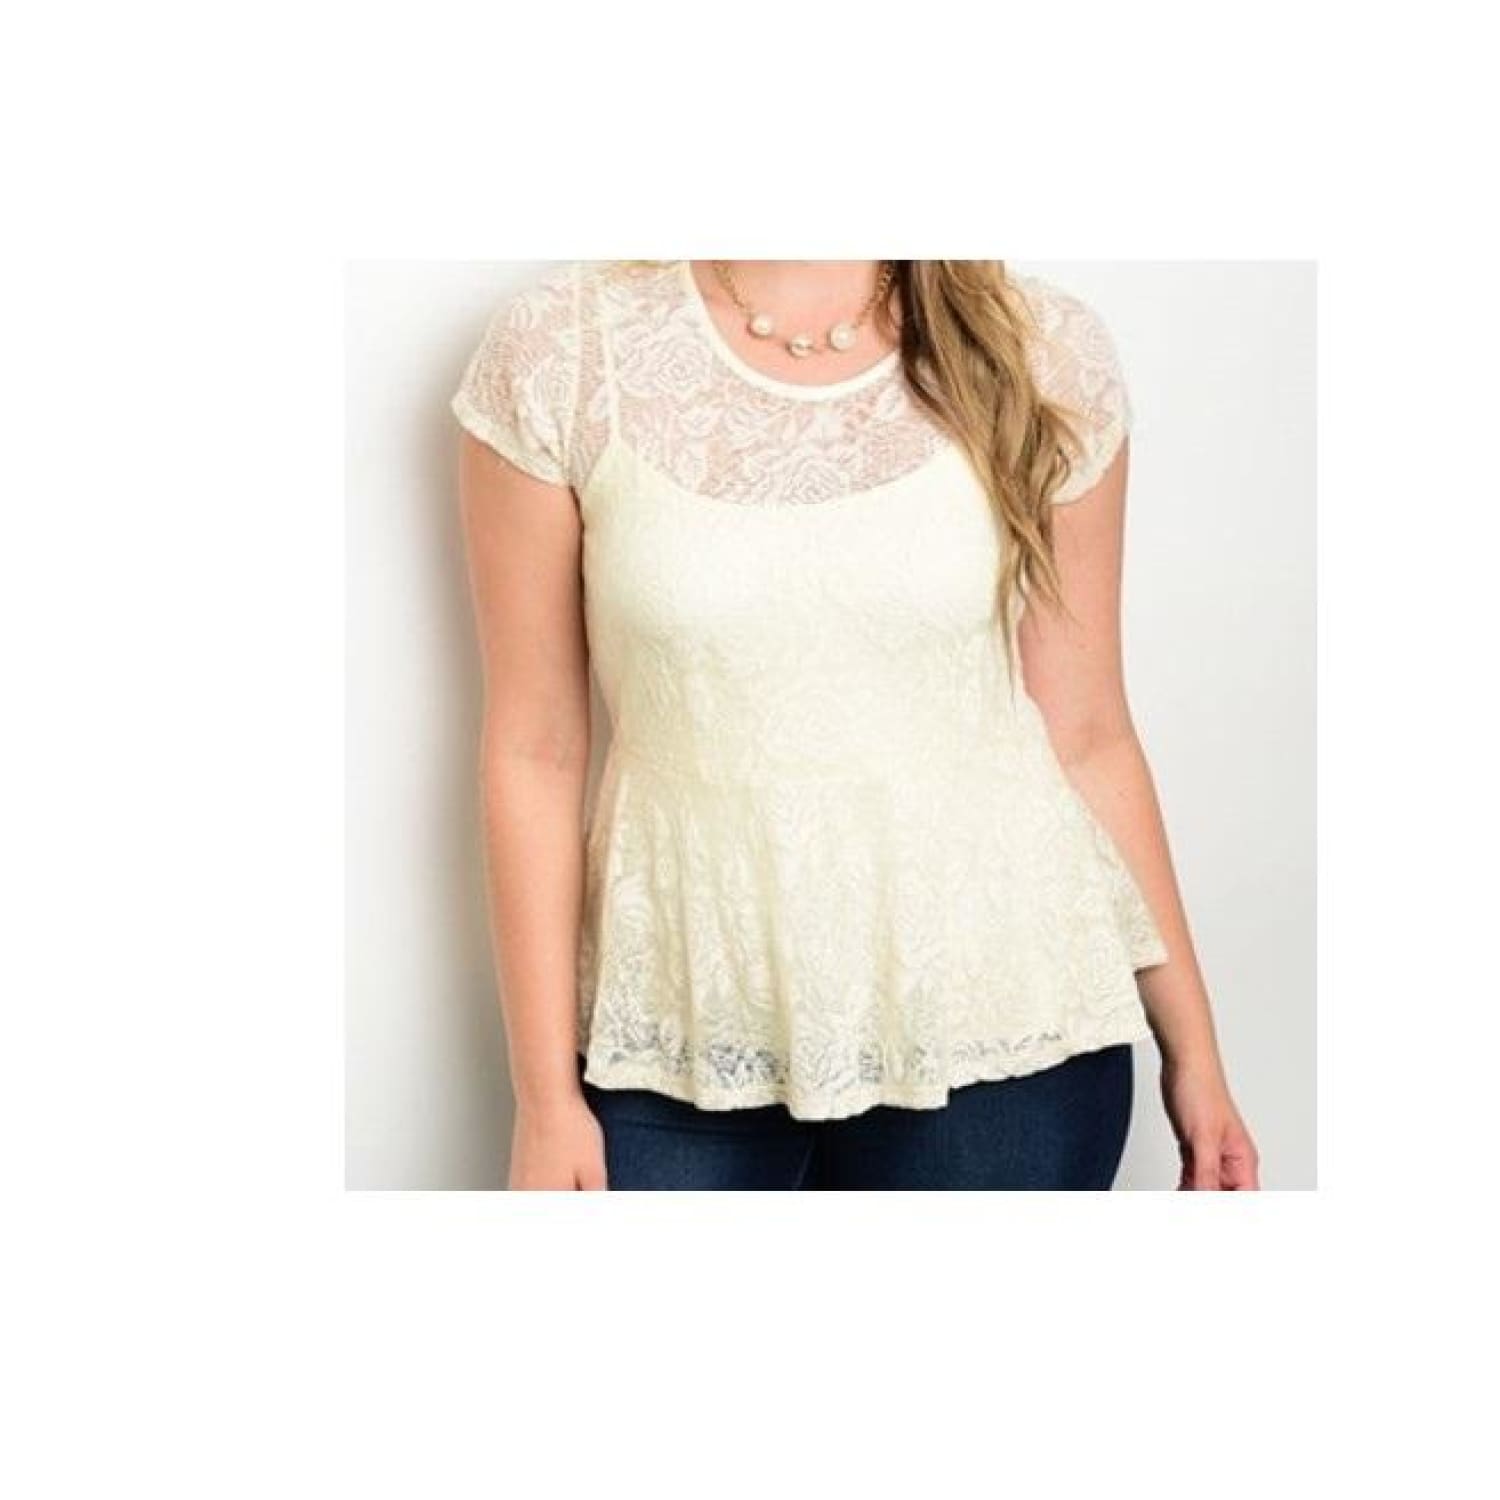 Lace Peplum Top - Best YOU by HTS